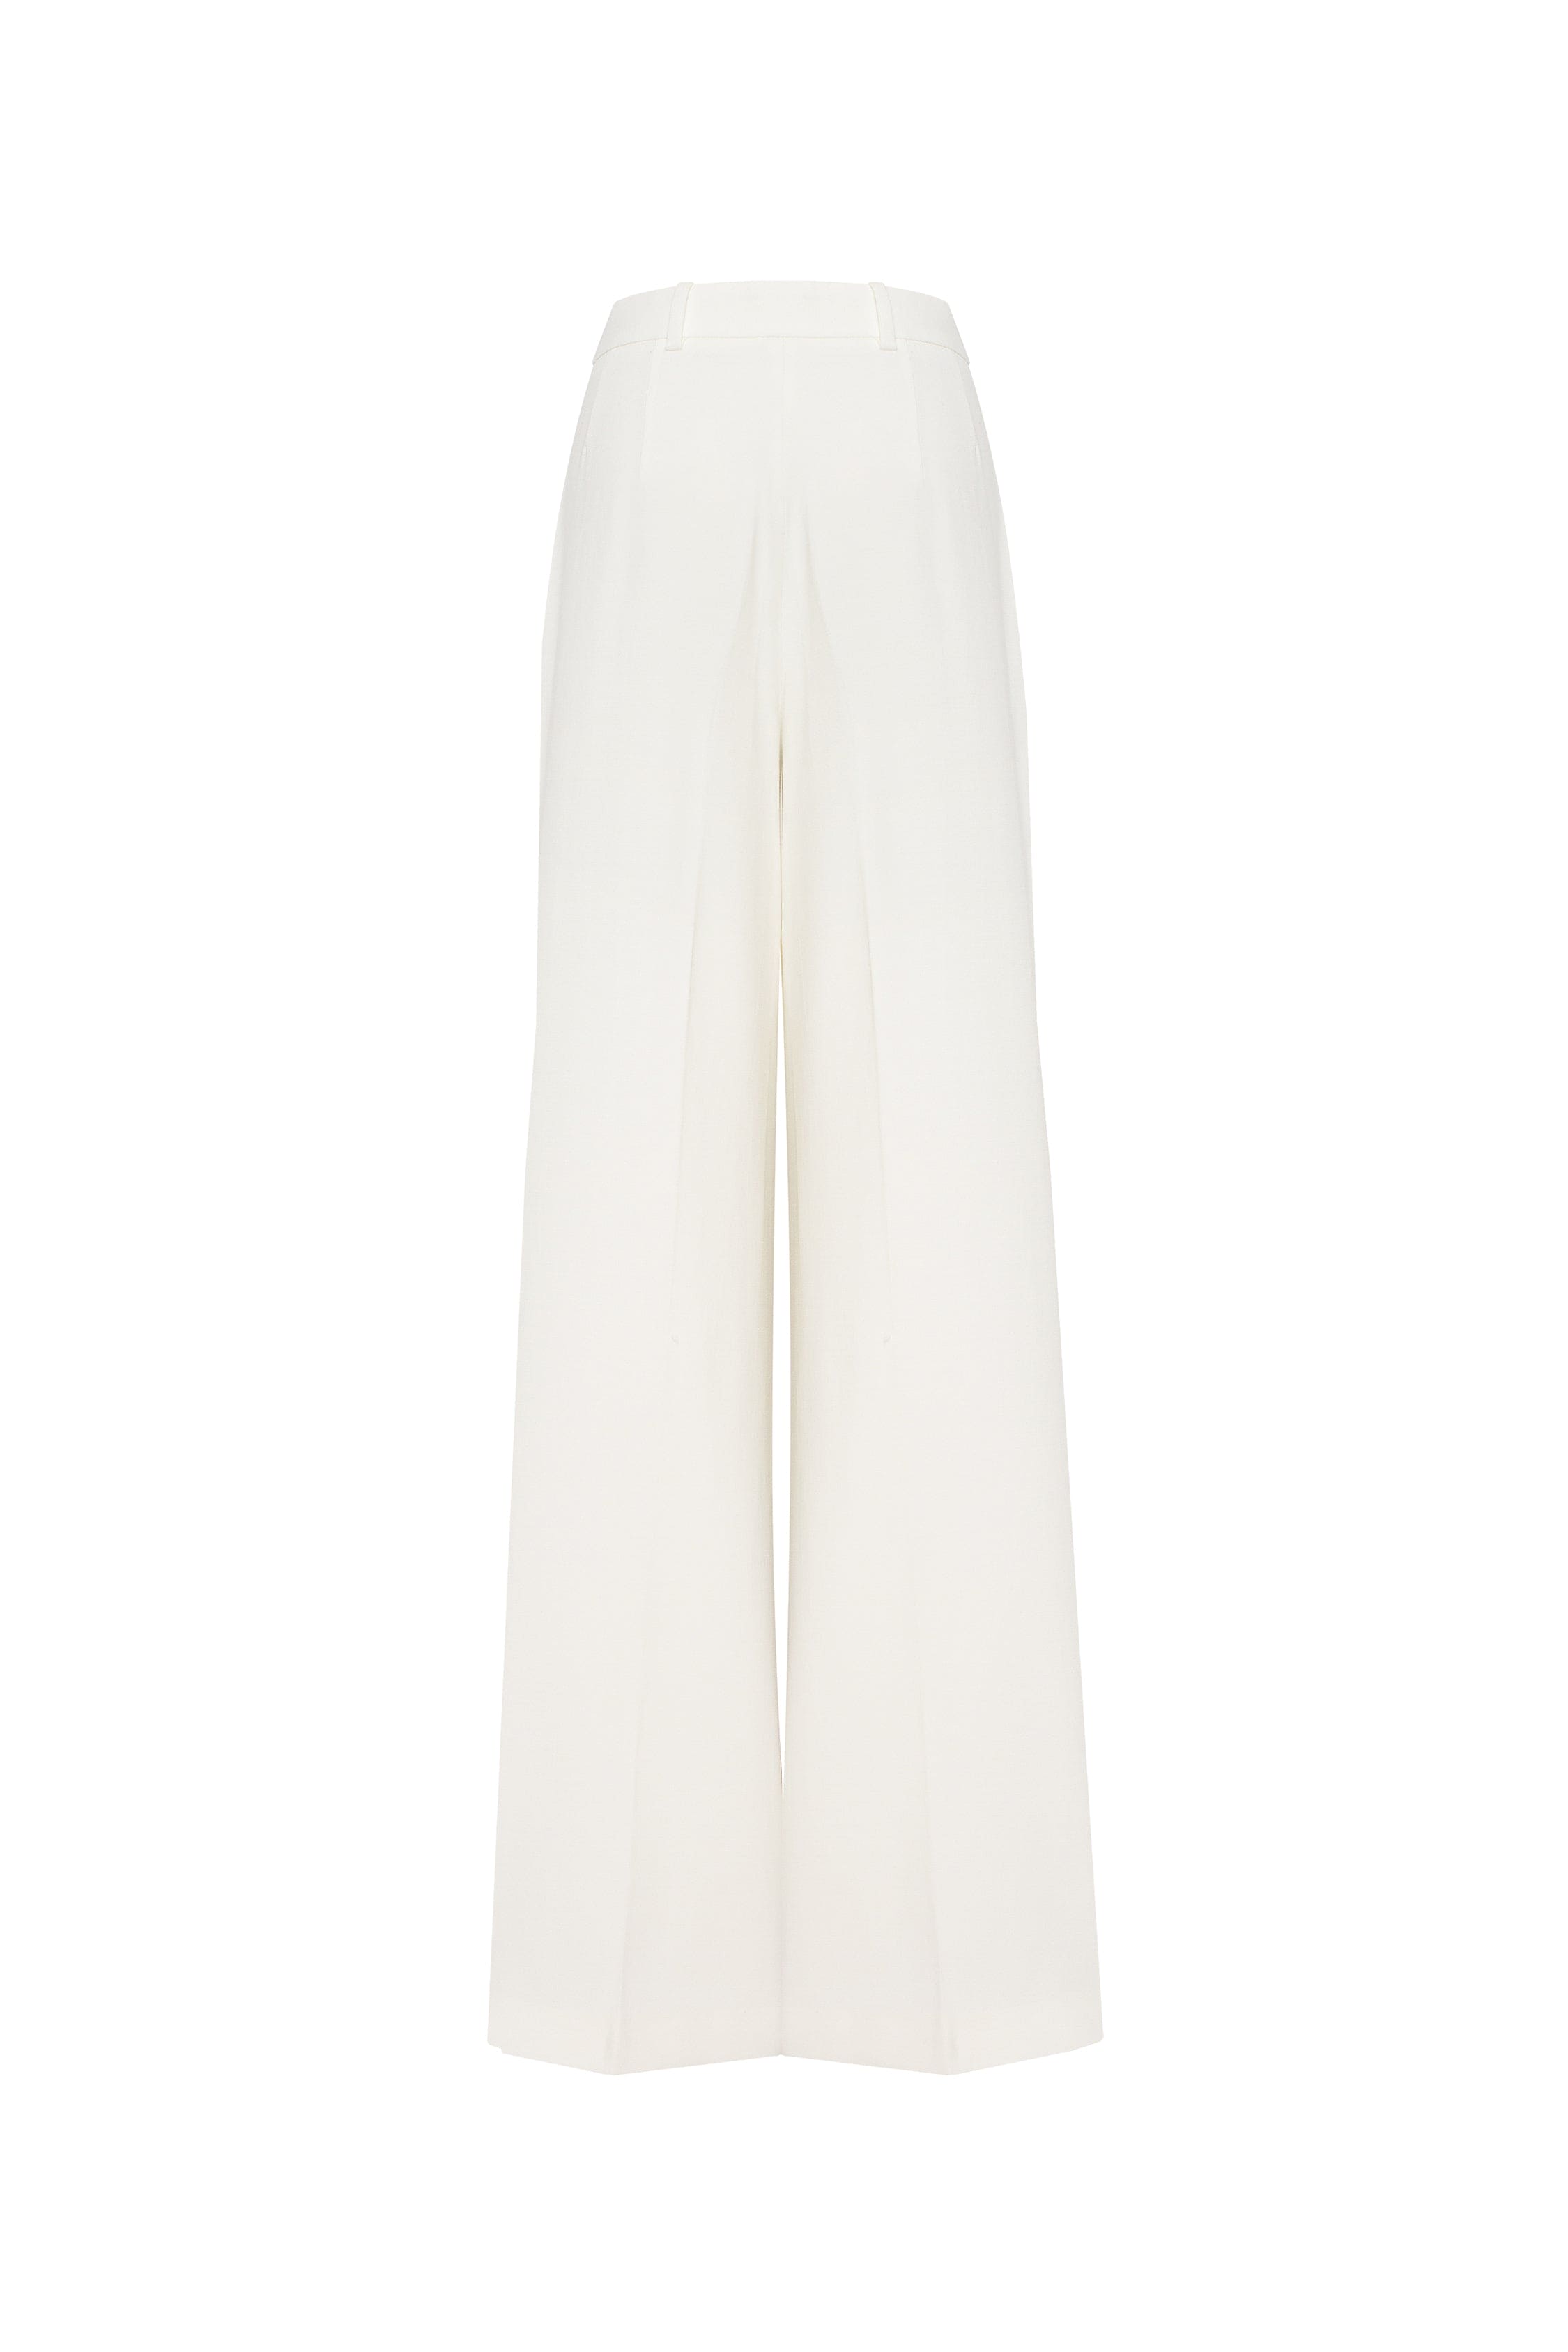 High-rise white suit pants, Xo Xo ➤➤ Milla Dresses - USA, Worldwide delivery